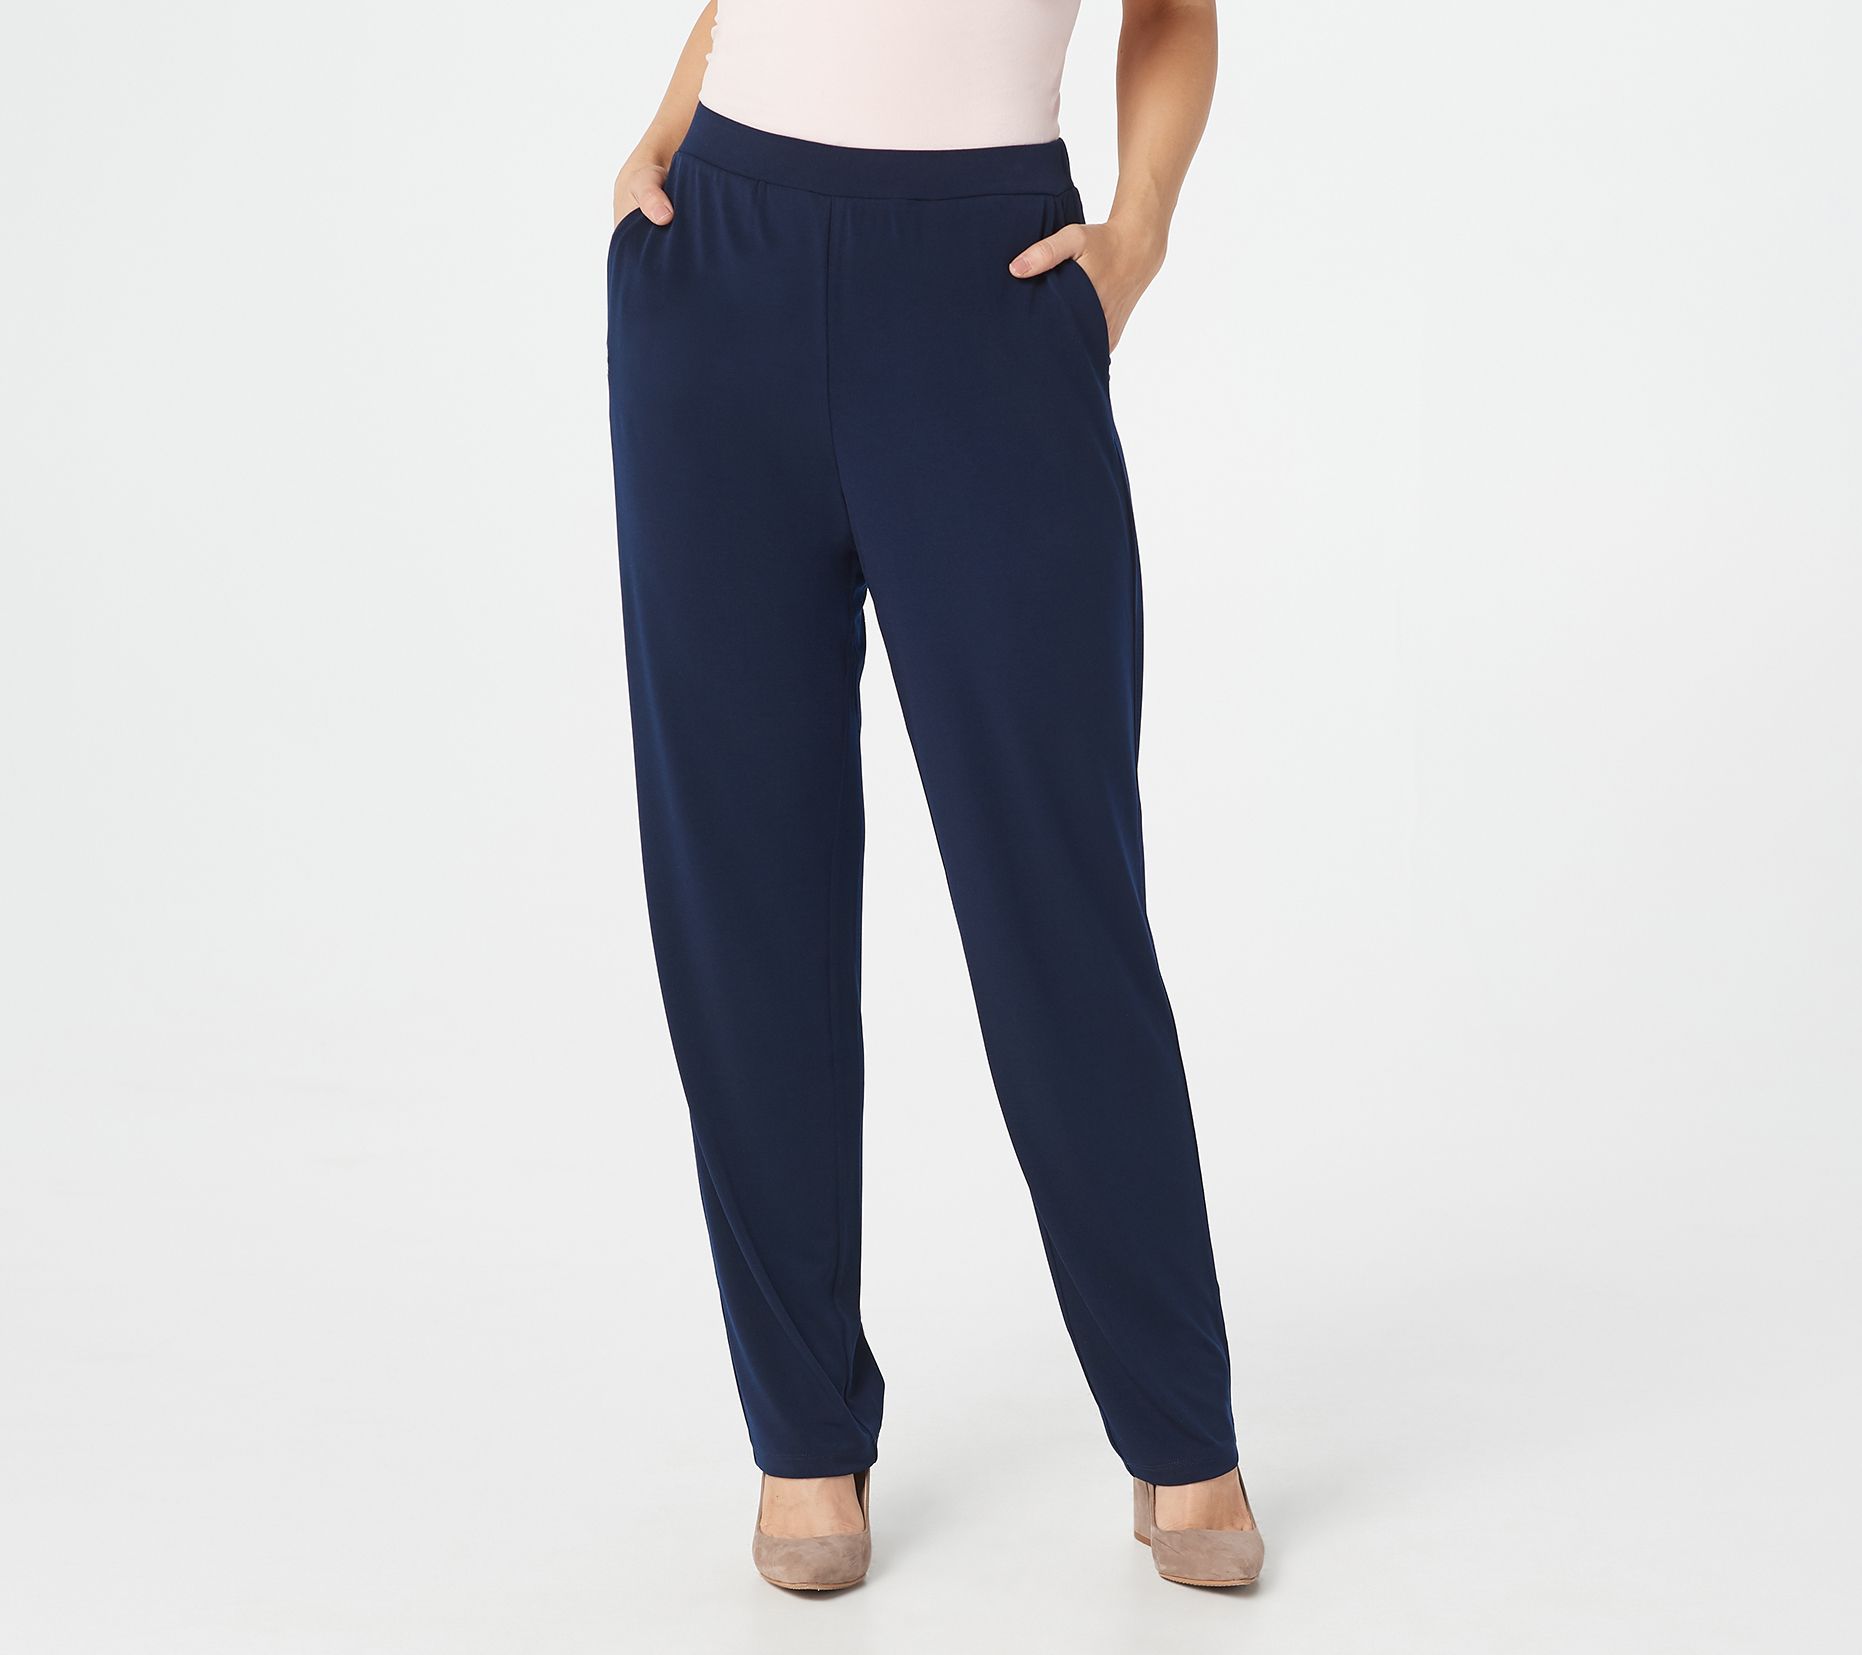 Every Day by Susan Graver Petite Liquid Knit Pull-On Pants - QVC.com